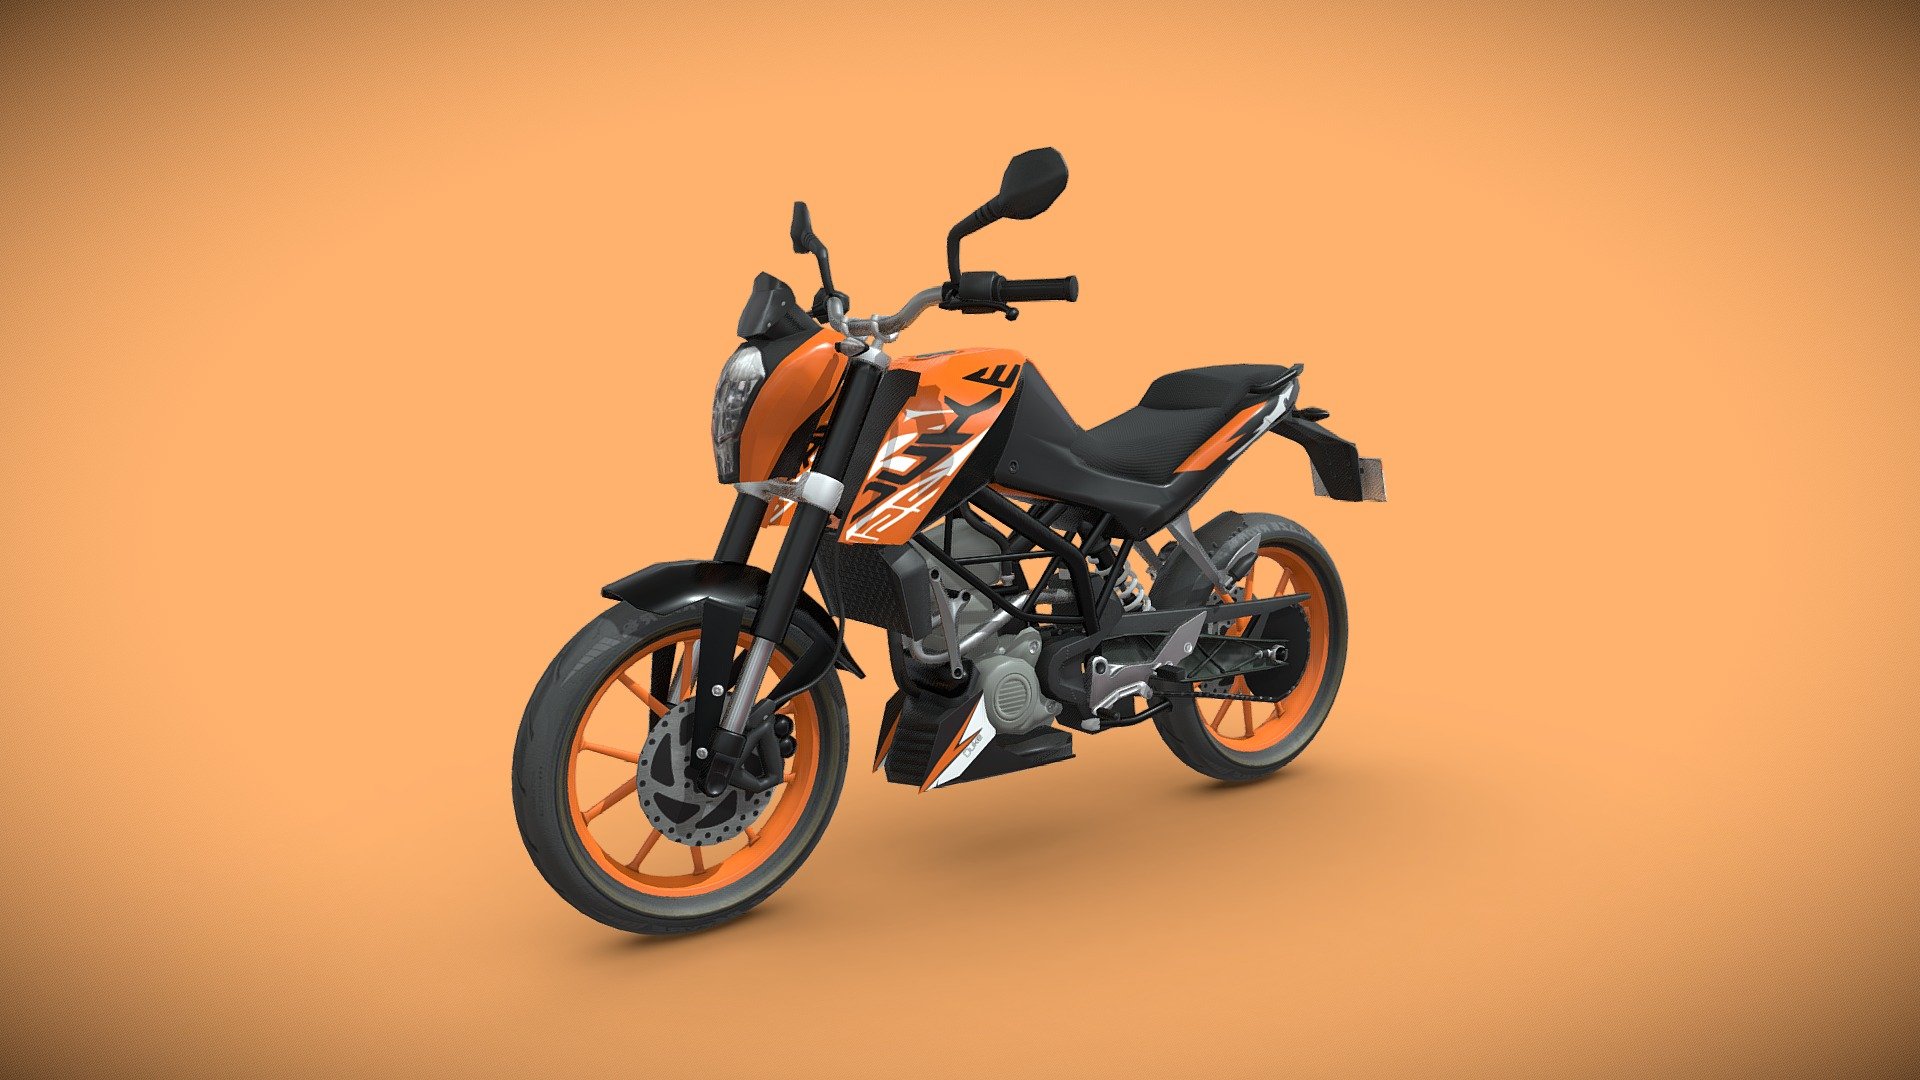 KTM Duke 125 is a sleek and stylish motorcycle known for its unique blend of performance and aesthetics.
This 3D model of the KTM Duke 125 captures the essence of a Sport motorcycle. With its sleek and stylish design, the KTM Duke 125 is a sleek and stylish.
Model Type: Polygonal
Polygons: 25,799
Vertices: 26,278
Formats available: Maya ASCII 2018, Maya Binary 2018, FBX , OBJ
Textures: Color, Normal, Height, Metallic, Roughness and Opacity maps
Texture Resolution: 4096 x 4096 pixels

The model is available in a range of file formats, including OBJ, FBX, and MAYA making it compatible with a variety of software programs. Whether you're a professional artist or a hobbyist, this 3D model is the perfect way to add a touch of excitement to your virtual projects.

Hope you like it!

Thank You 3d model